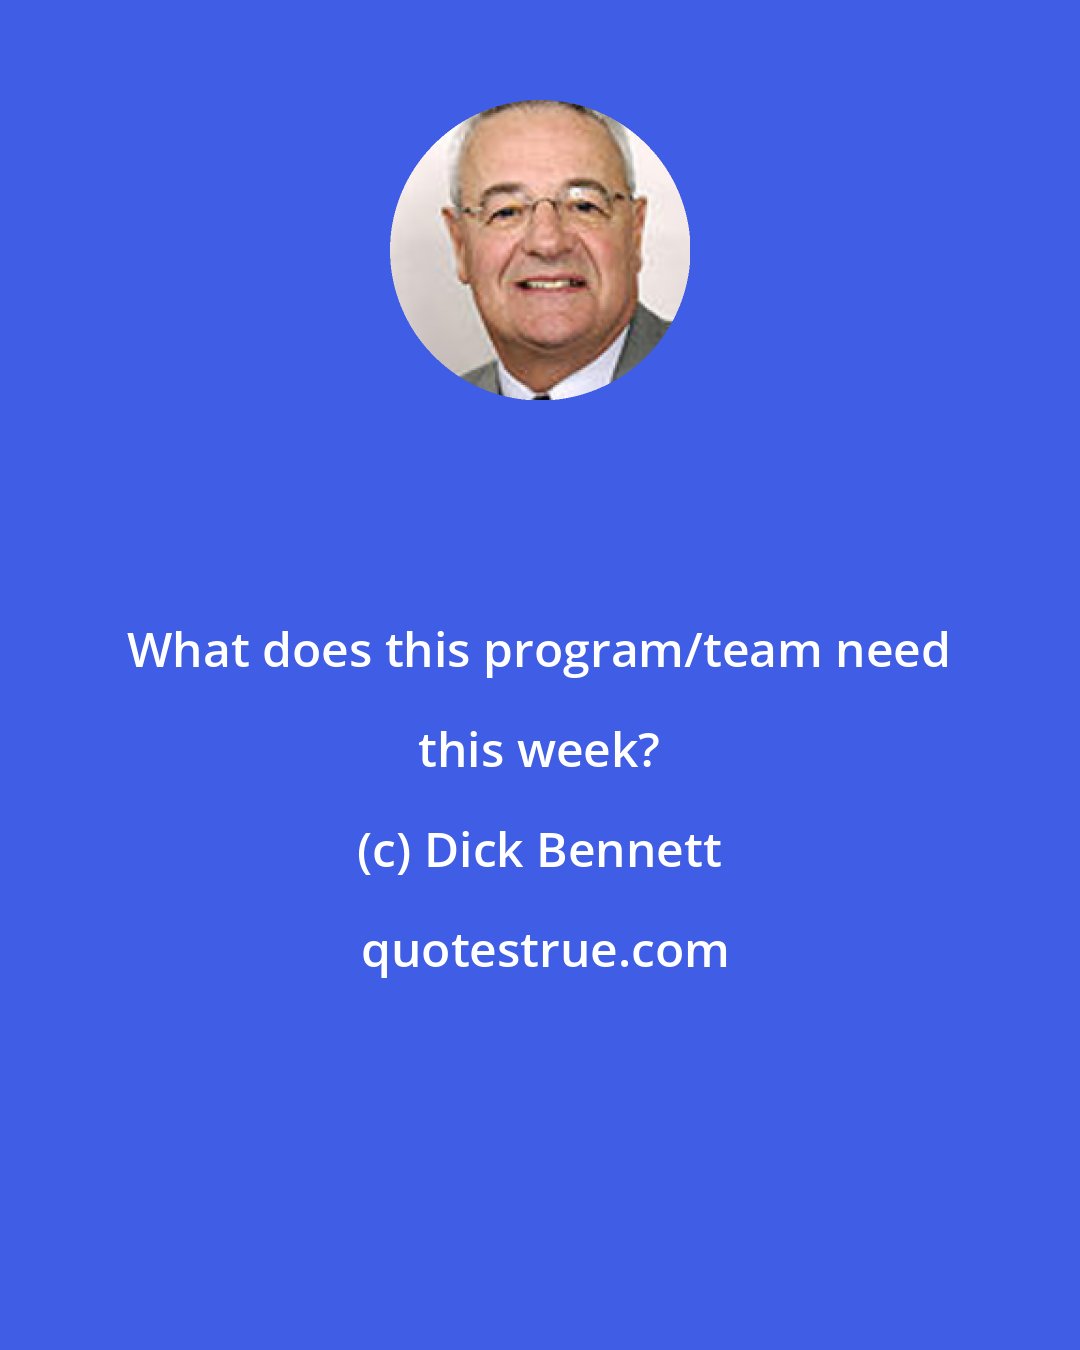 Dick Bennett: What does this program/team need this week?